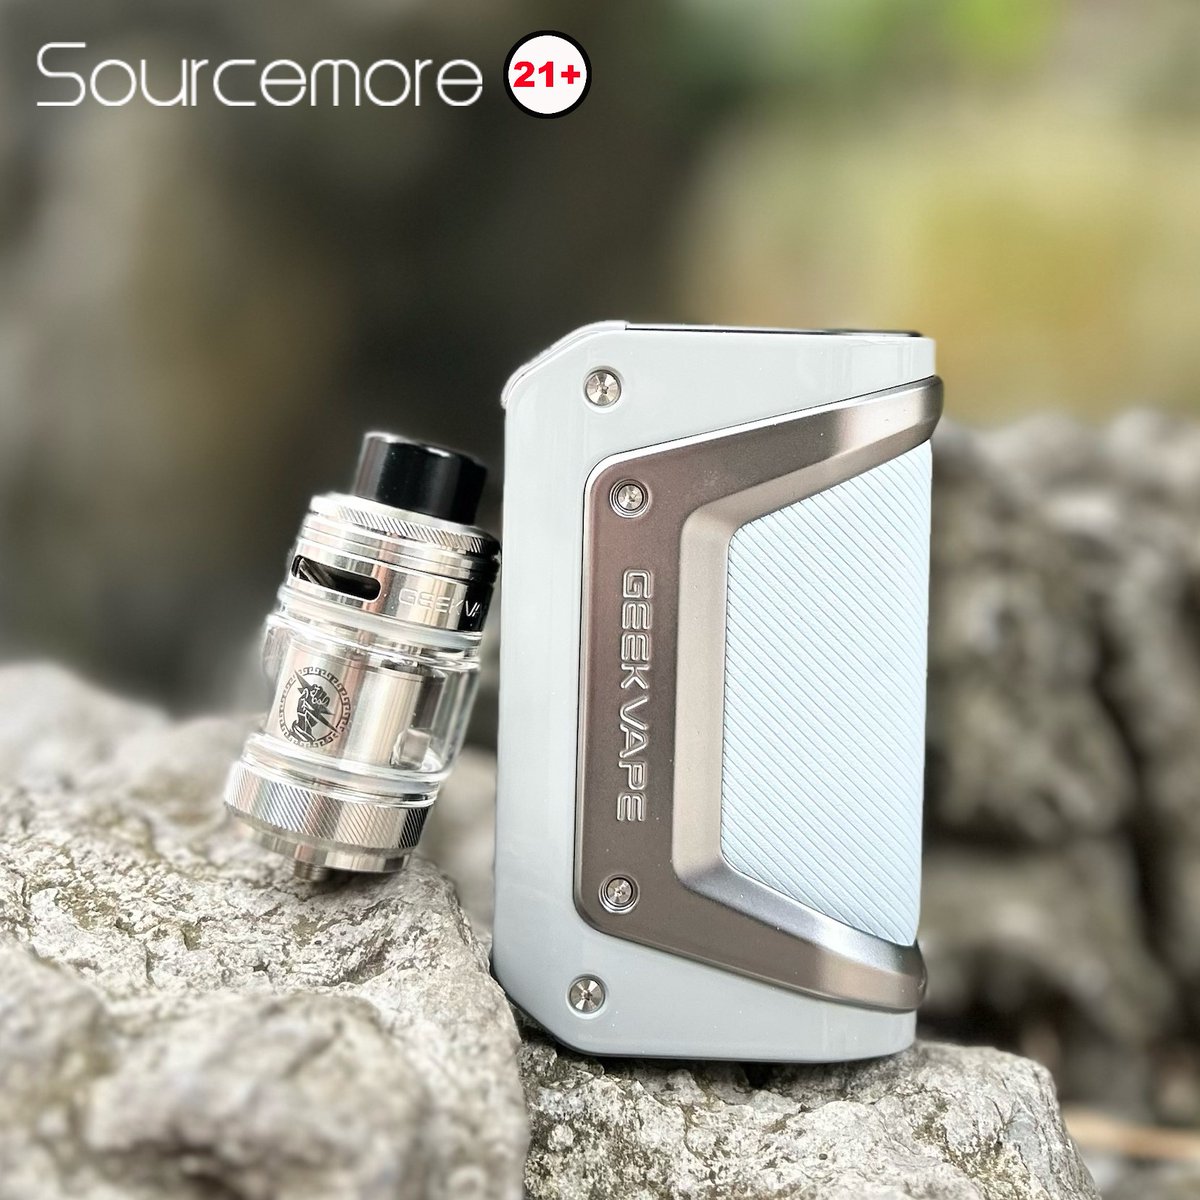 GeekVape Aegis Legend III 3 Kit Customize your vaping style with our first-ever MEMORY Mode which saves up to 5 of your favorite vaping settings❤️🎉 👀Photo by Sourcemore ⚠ Warning: The device contains addictive chemical nicotine. For Adult use only.